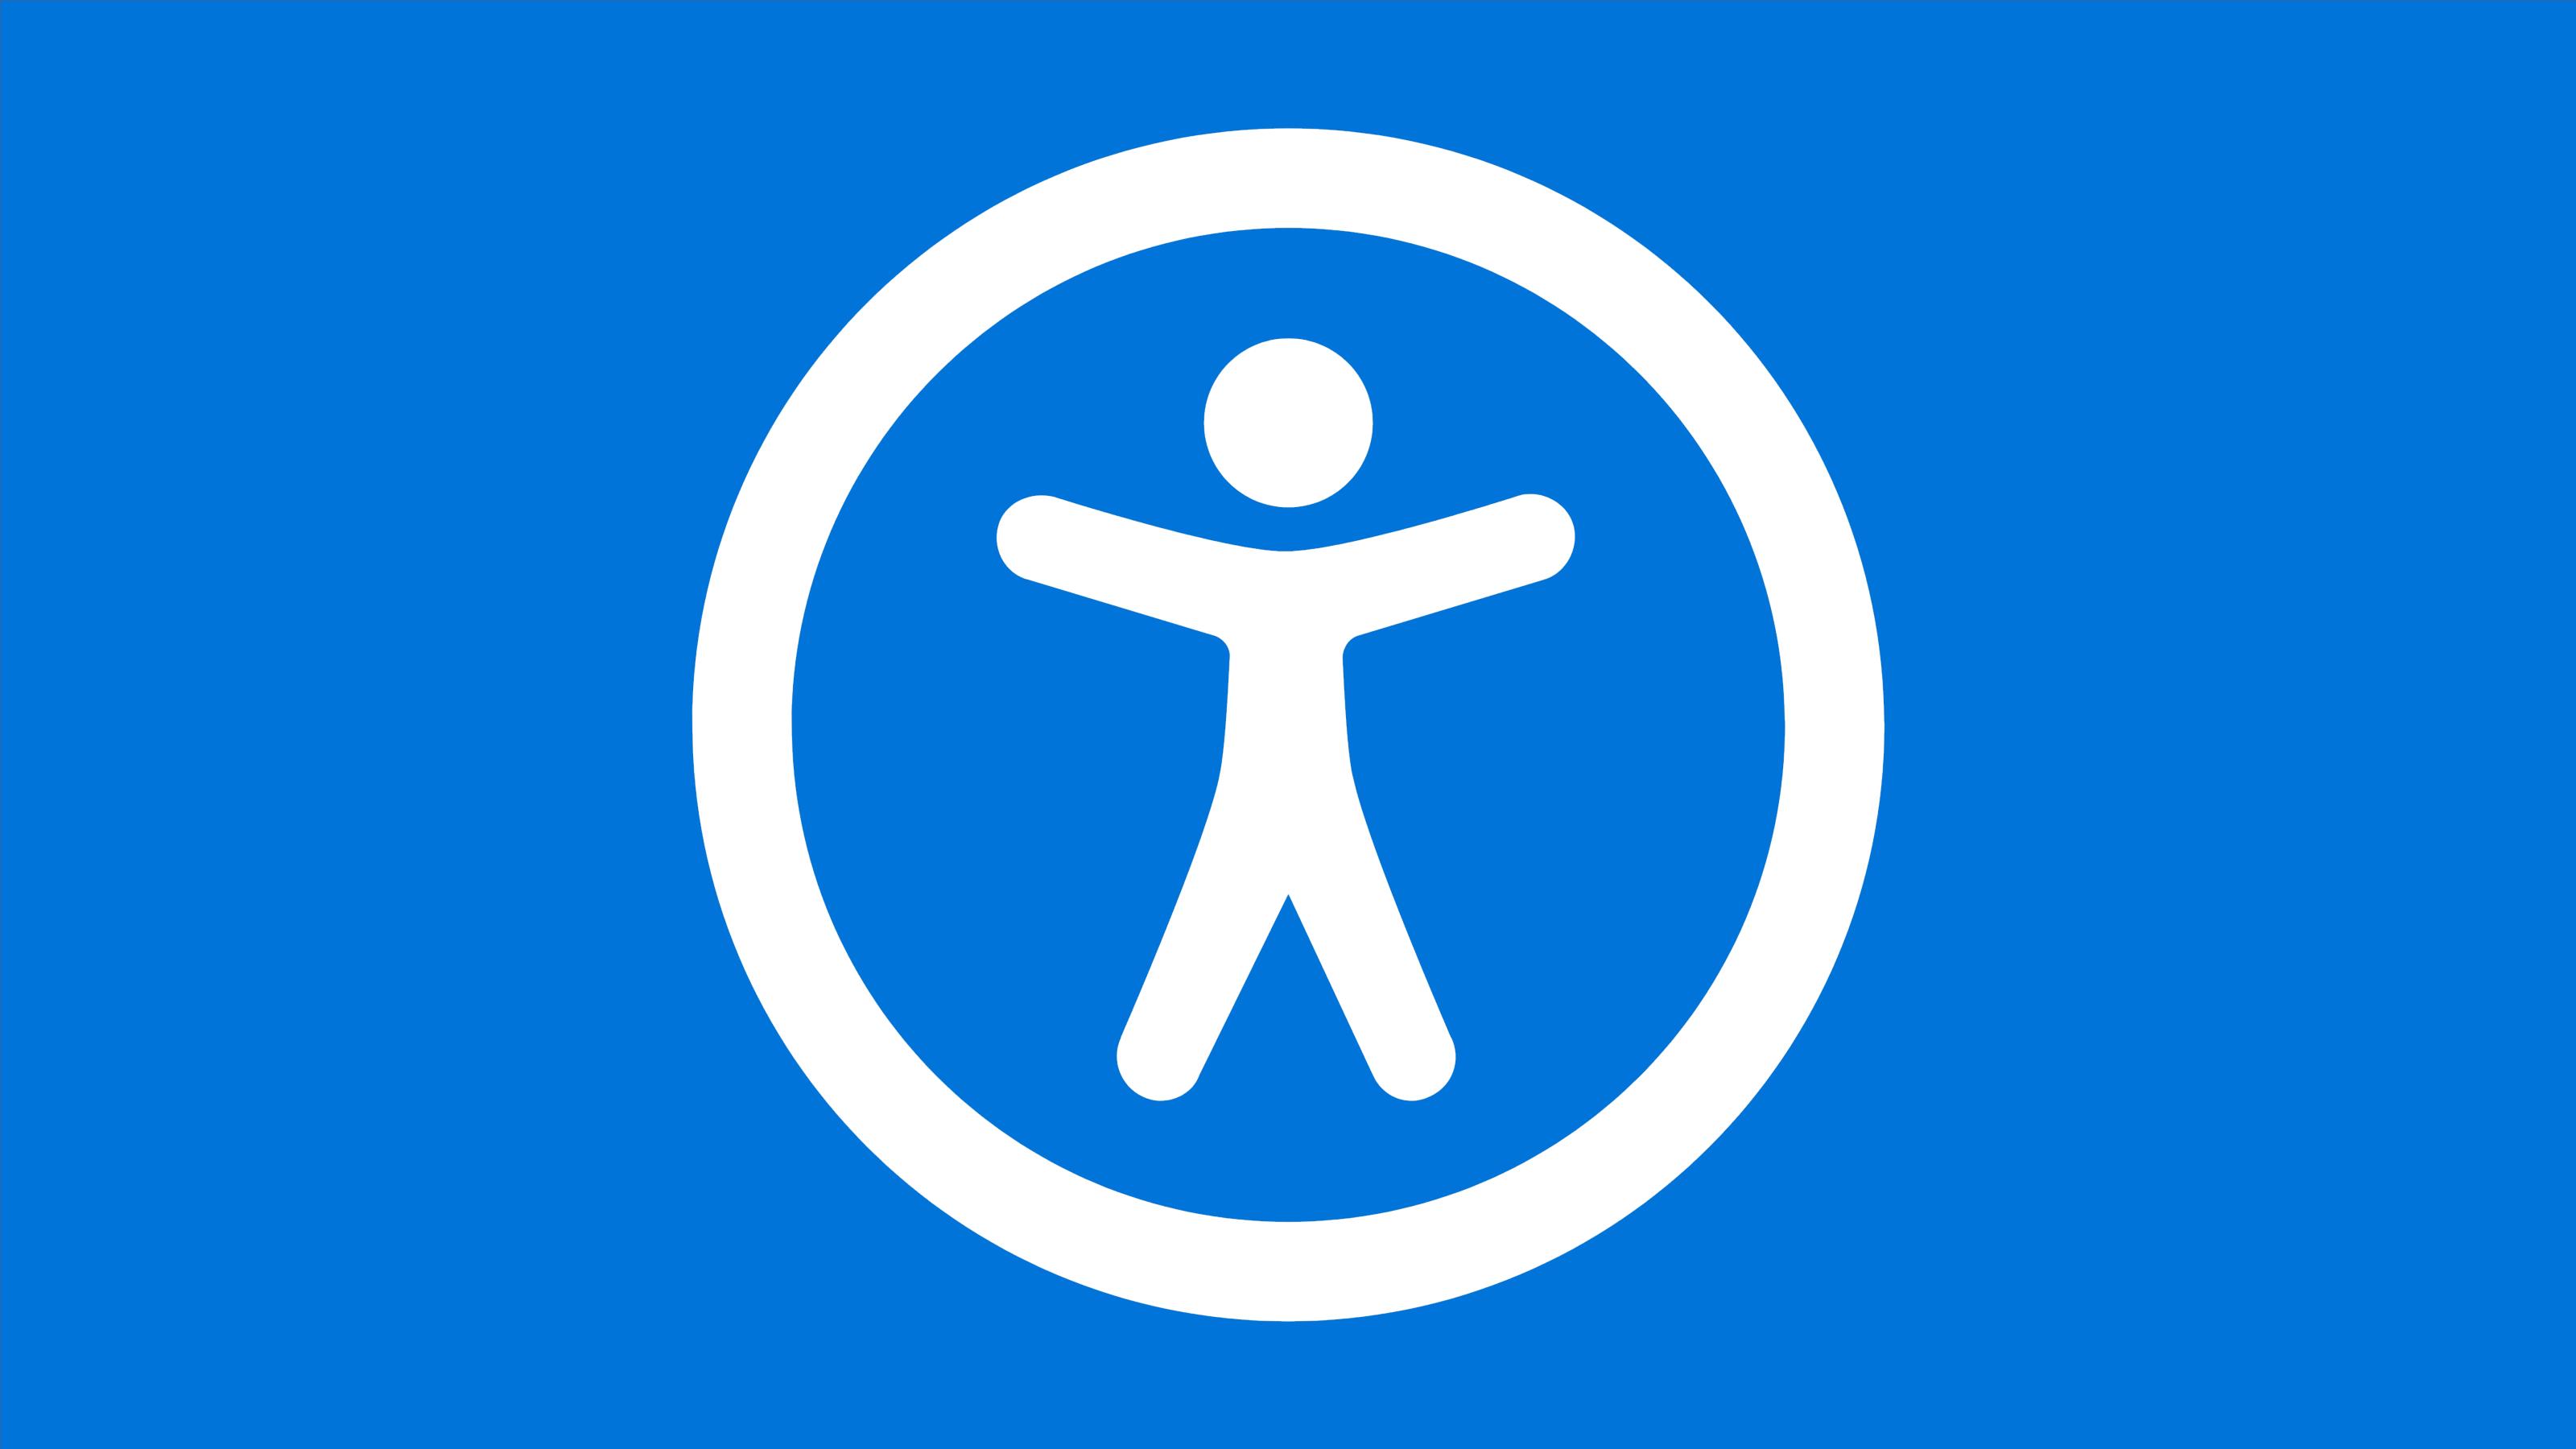 Universal access icon: a stick figure with a circle surrounding them.